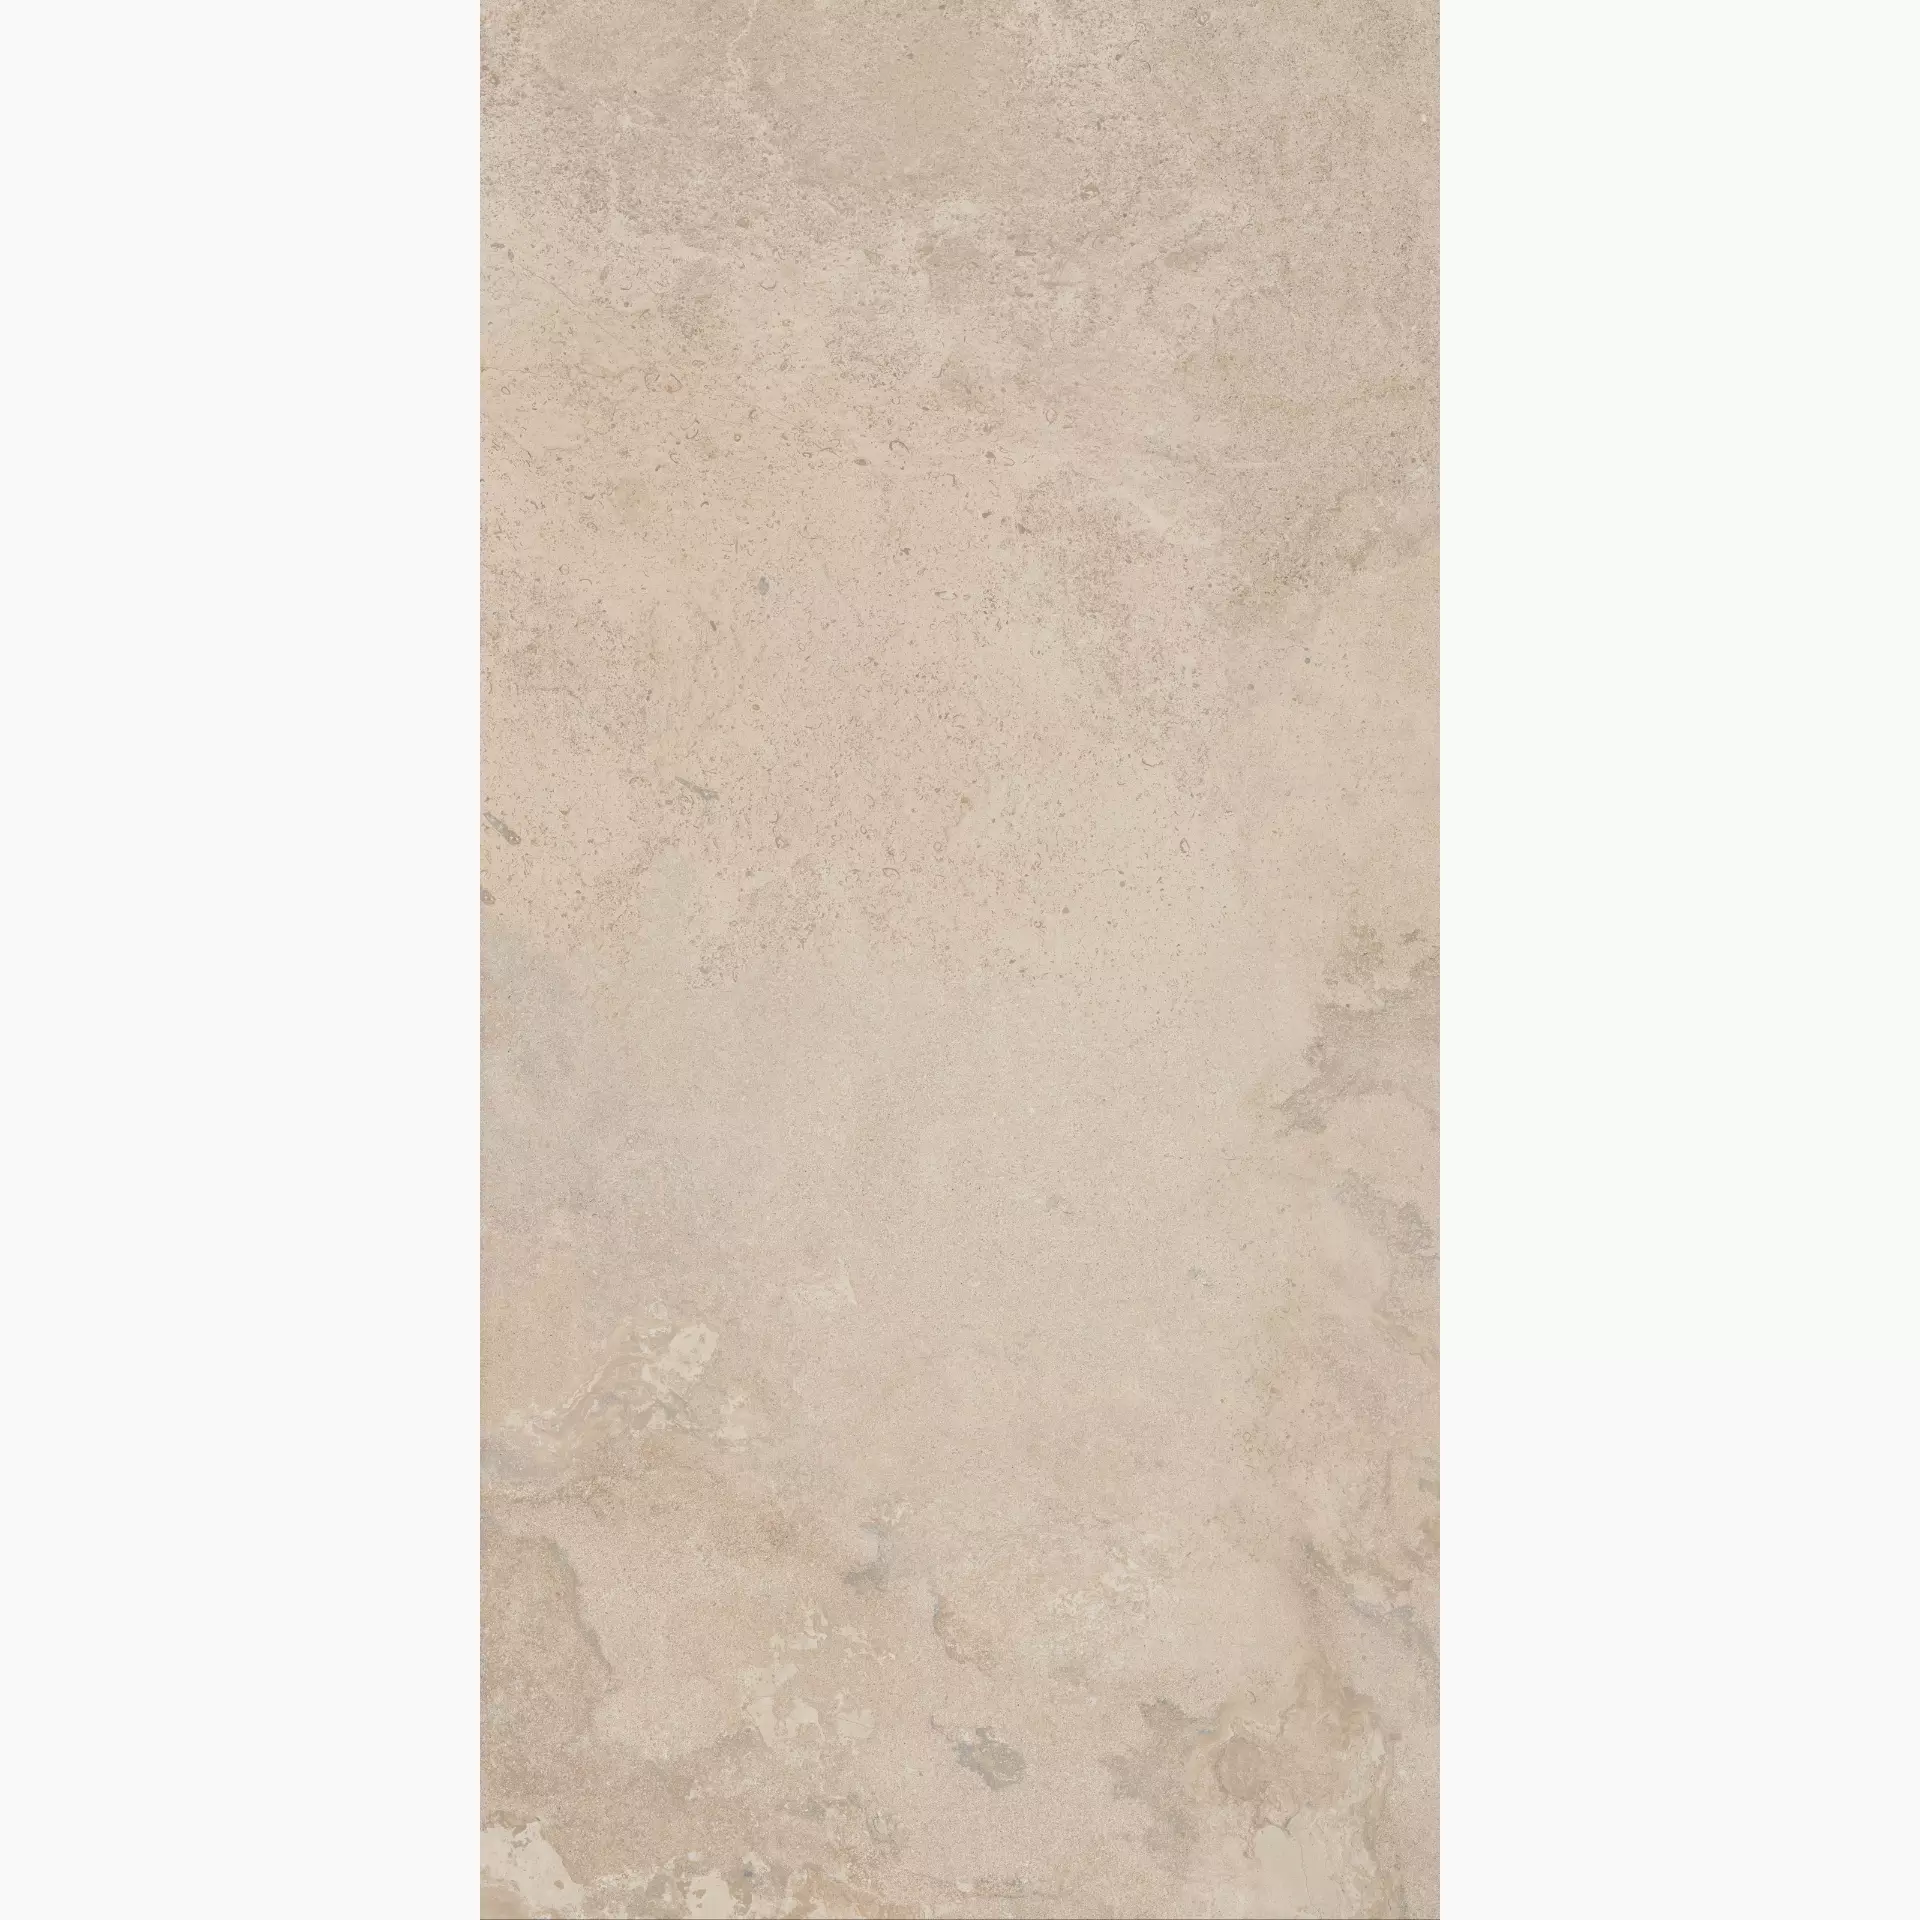 ABK Alpes Wide Sand Naturale PF60000206 80x160cm rectified 8,5mm